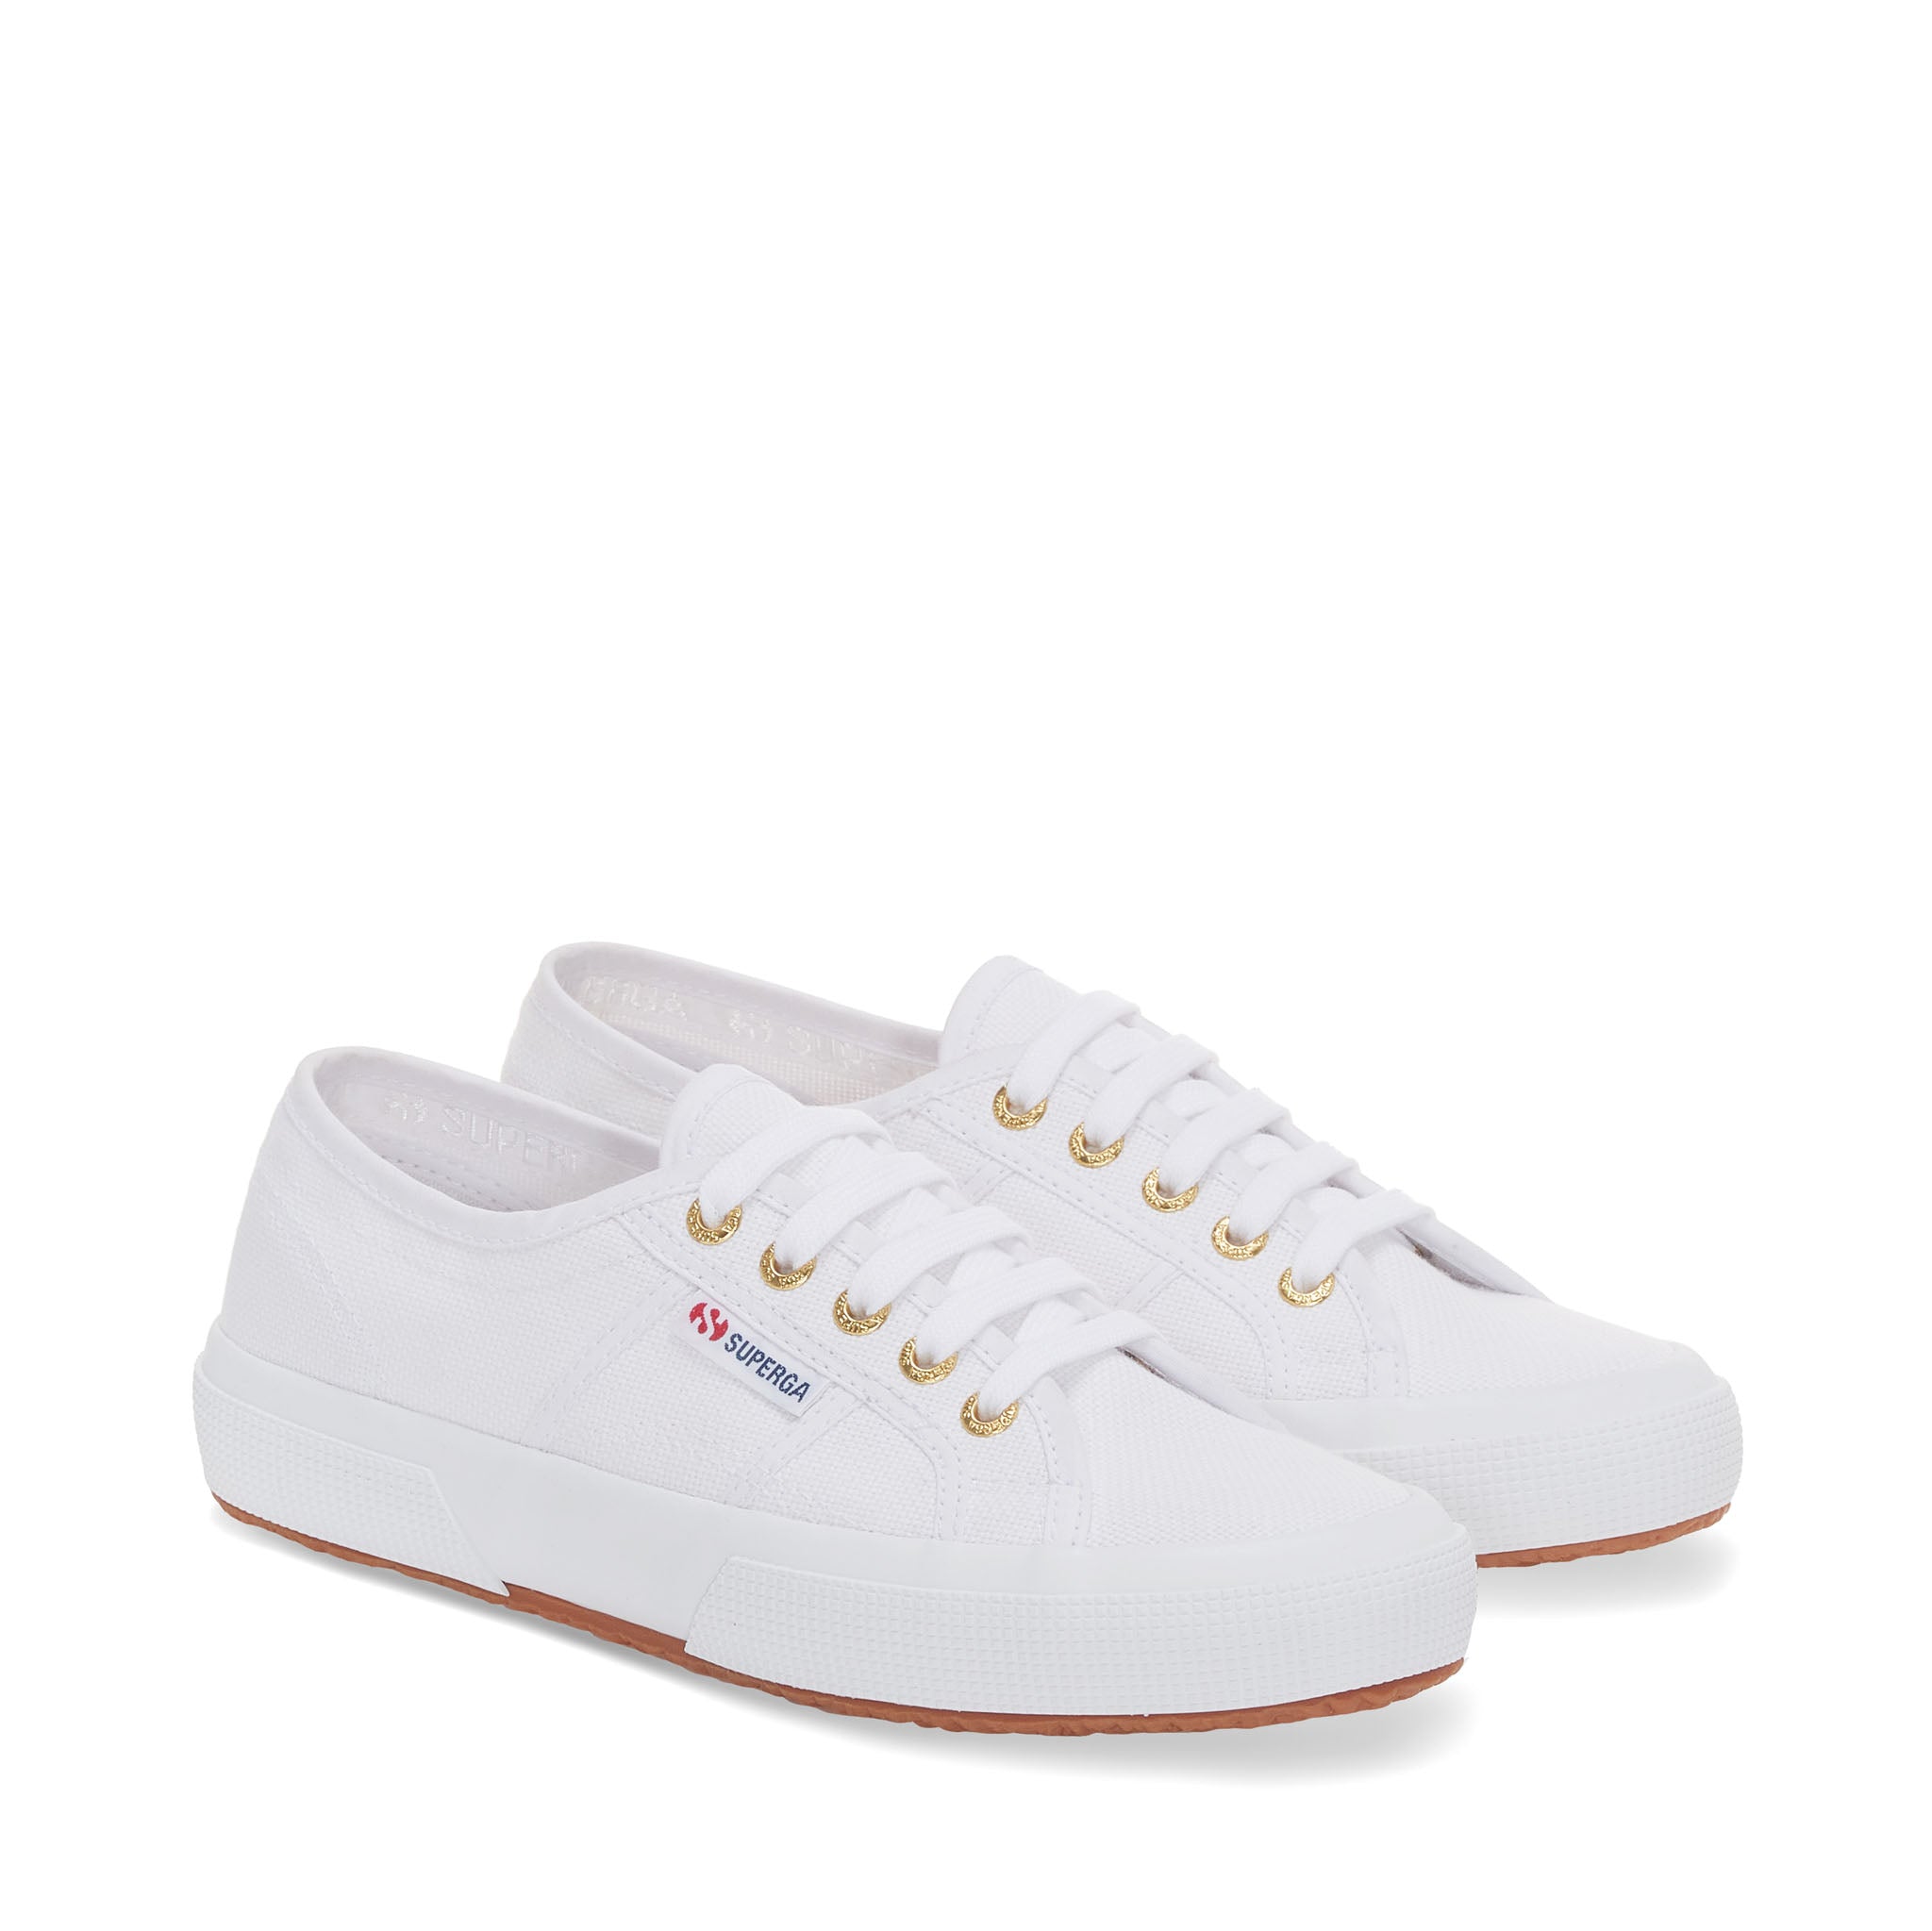 Superga 2750 Cotu Classic Sneakers - White Gold. Front view.